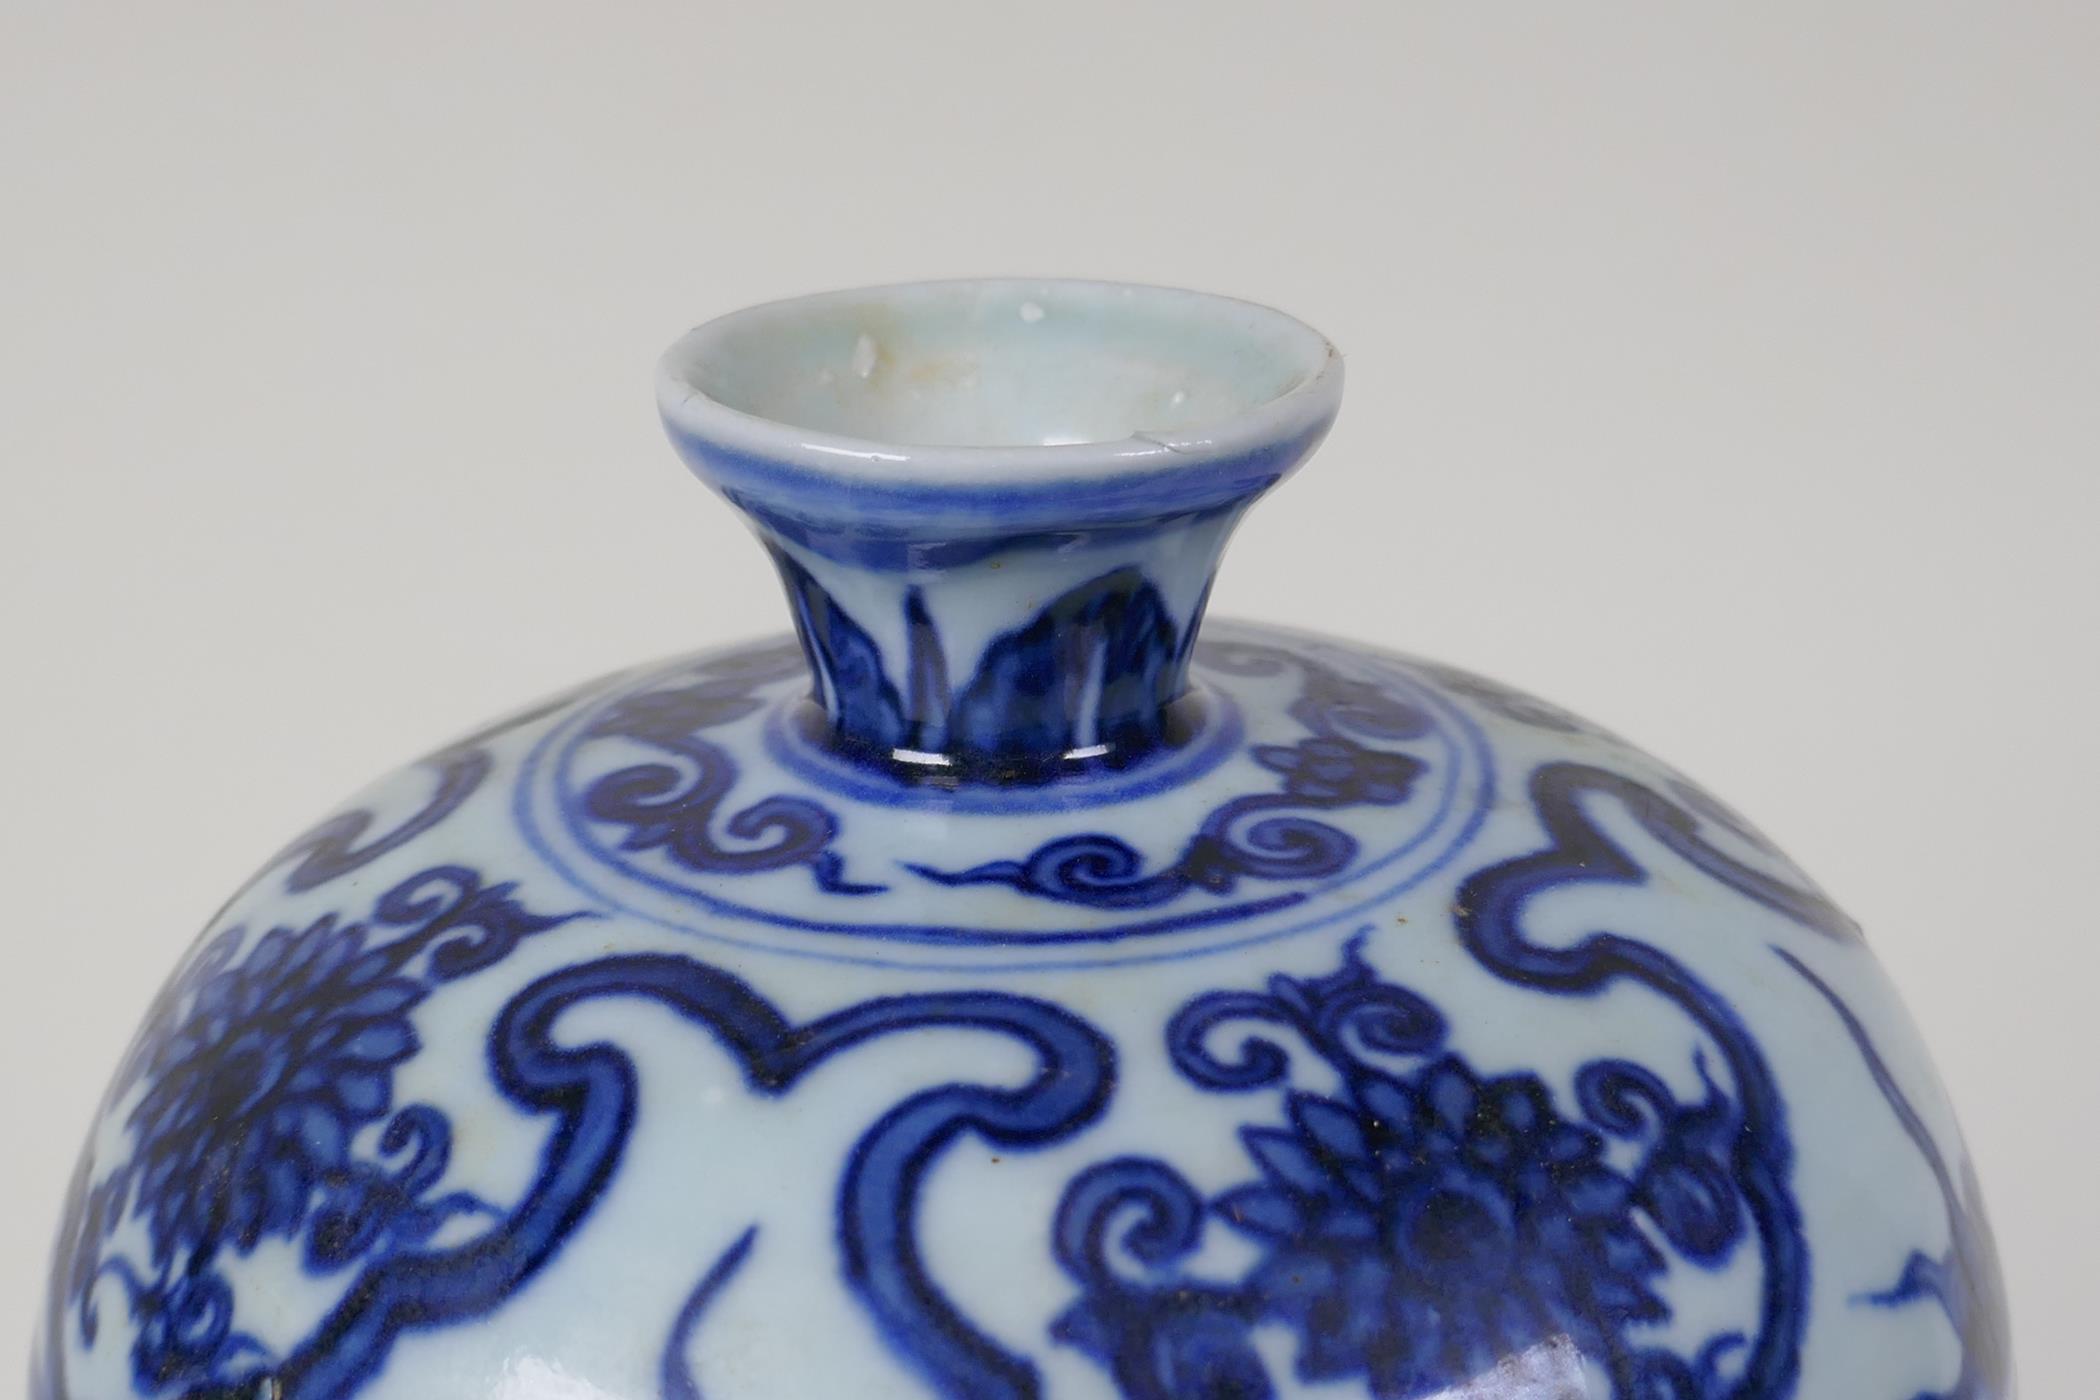 A Chinese ming style blue and white porcelain vase with scrolling lotus flower pattern, 11½" high - Image 6 of 8